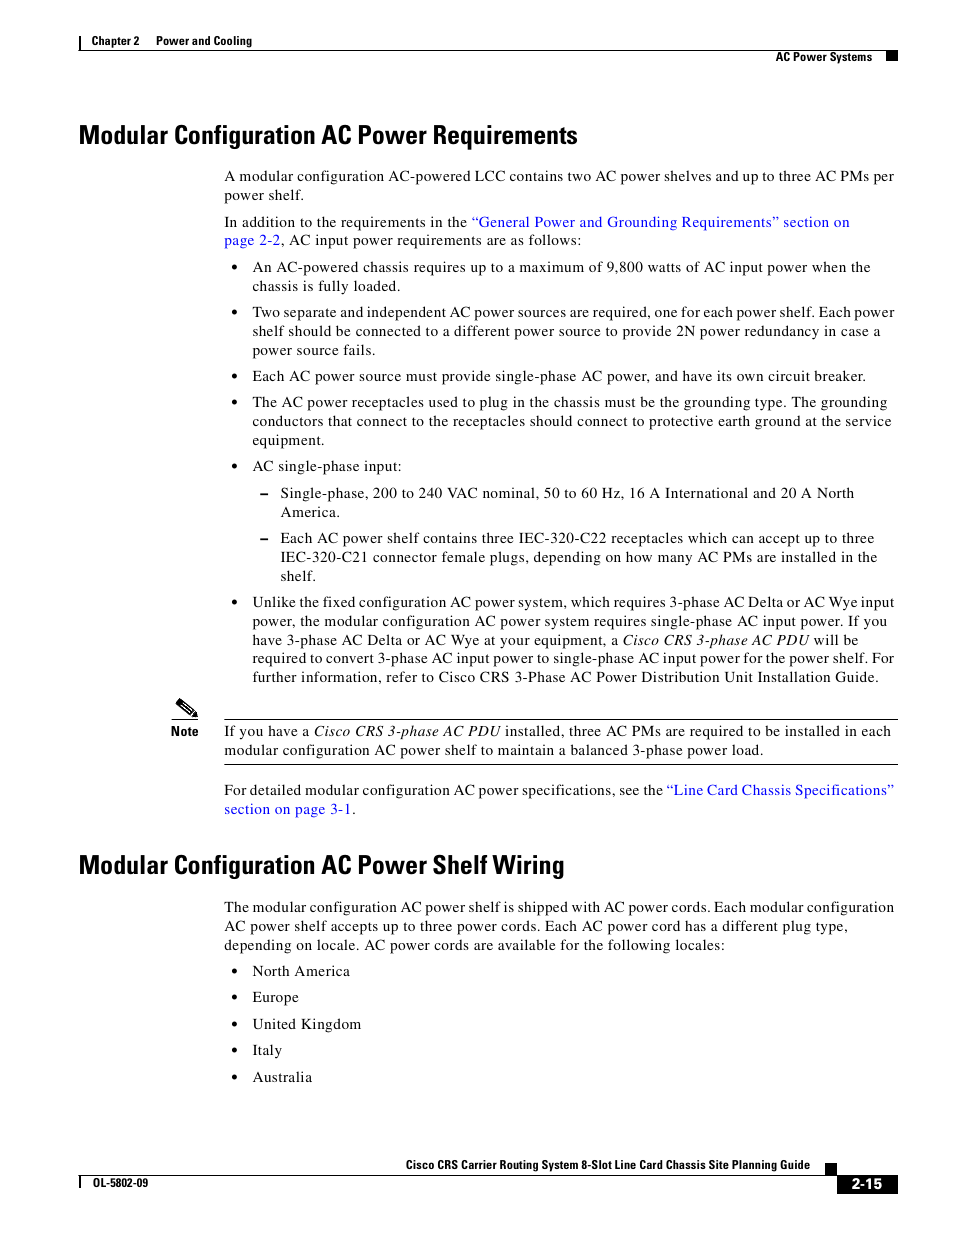 Modular configuration ac power requirements, Modular configuration ac power shelf wiring | Cisco CRS-1 User Manual | Page 35 / 70